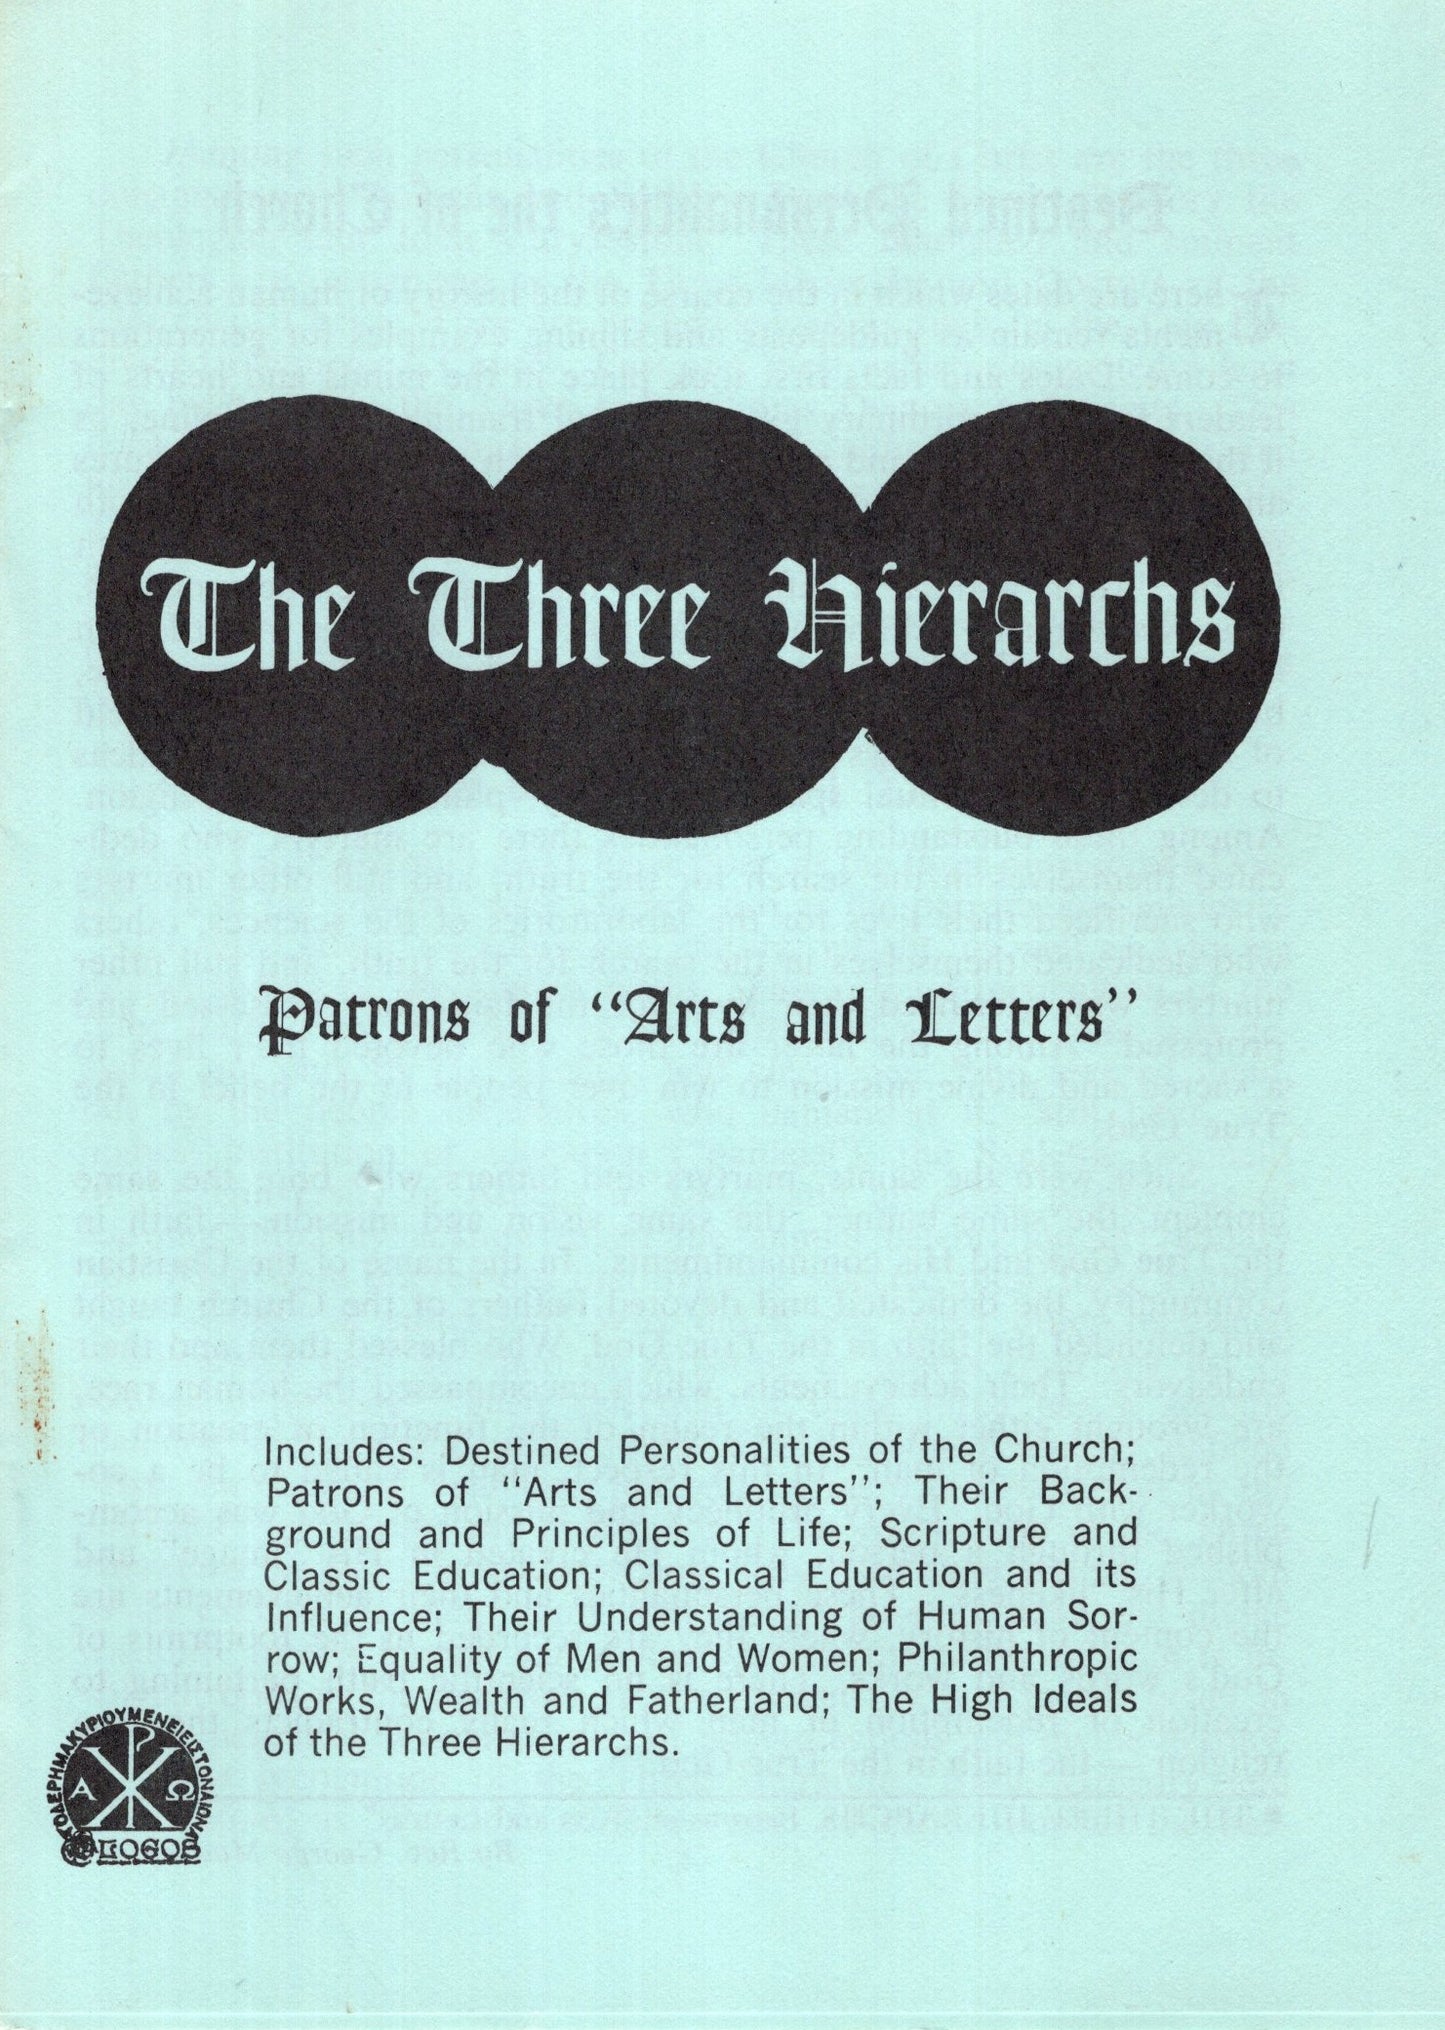 The Three Hierarchs: Patrons of "Arts and Letters"